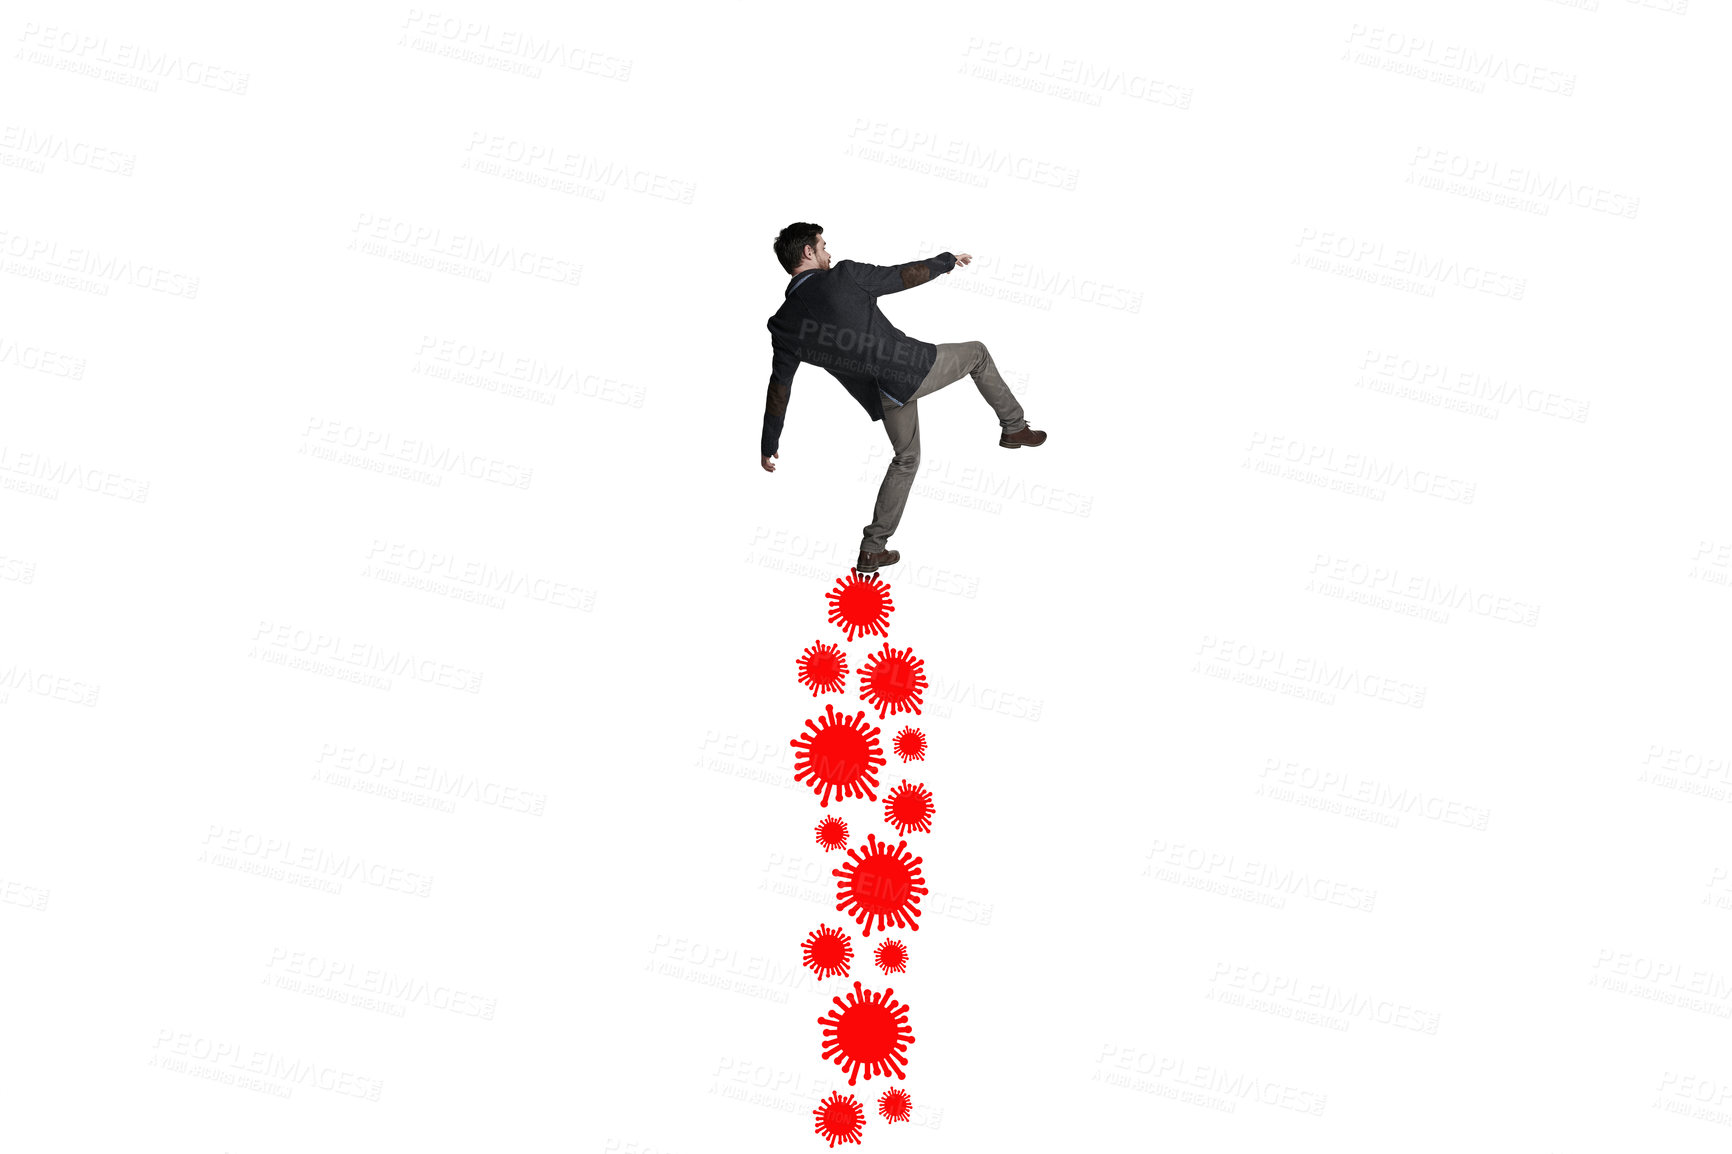 Buy stock photo Shot of a businessman balancing on top of stack of viruses against a white background